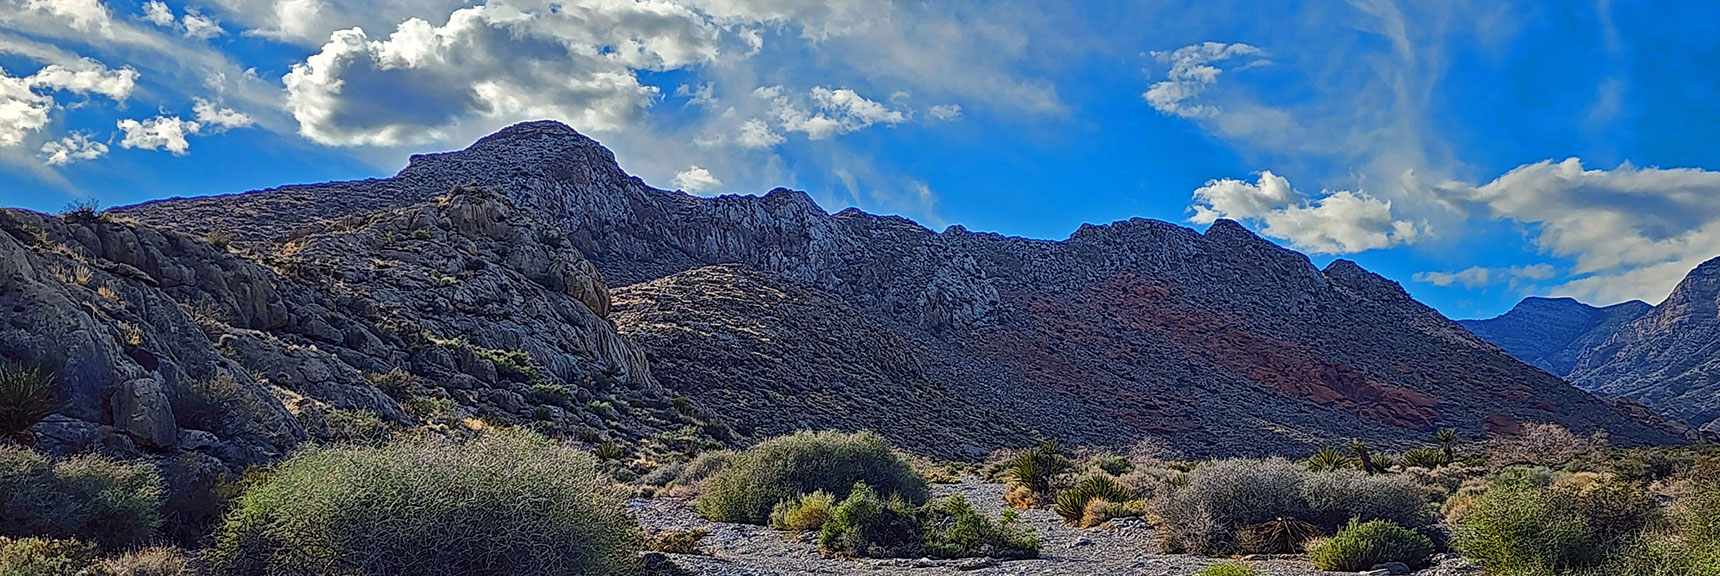 More Complete View Back Up Gray Cap Ridgeline from Further Below. | Gray Cap Ridge / Brownstone Basin Loop | La Madre Mountains Wilderness, Nevada